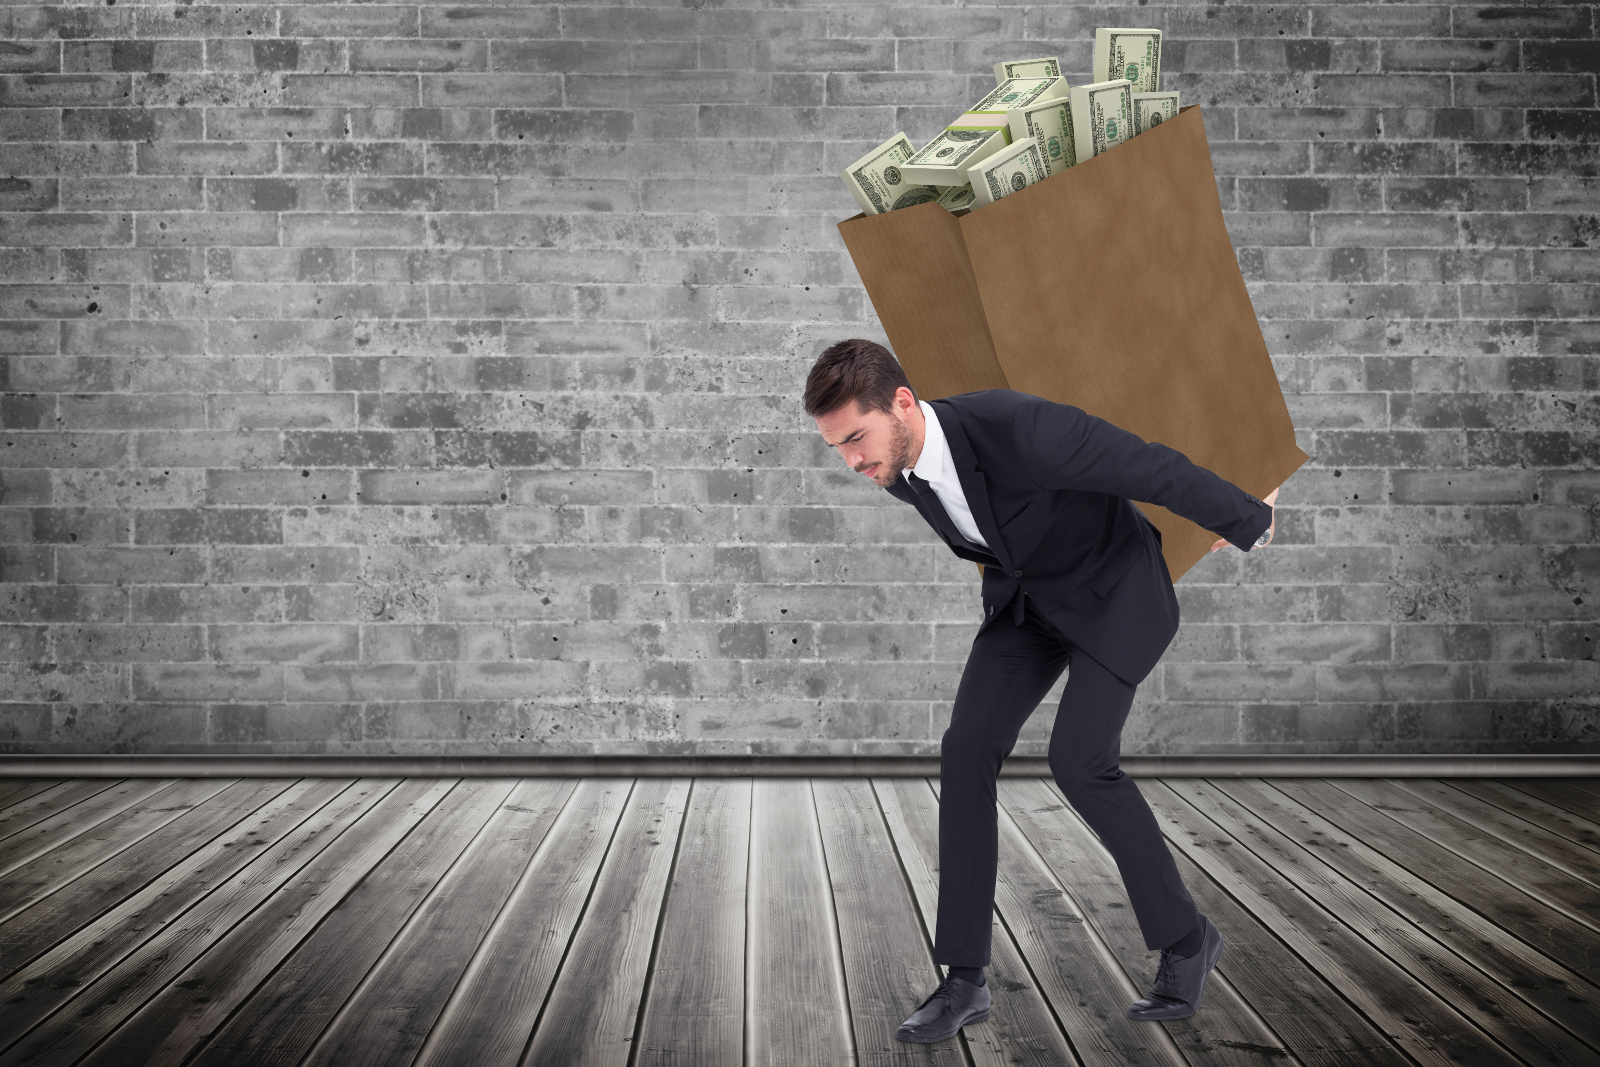 Image of a man with a sack of money on his back, representing the idea of overspending.